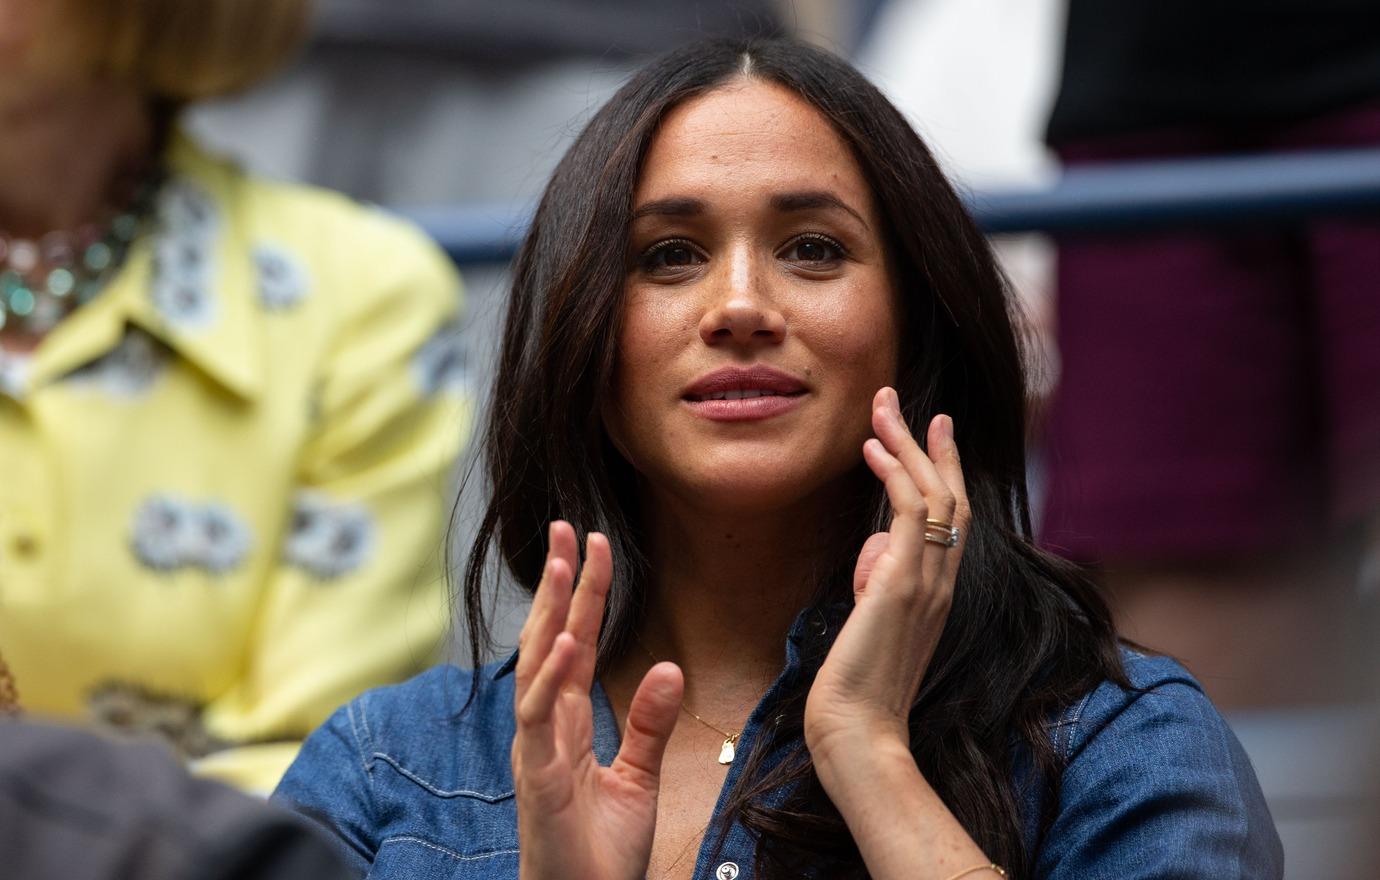 Meghan Markle Embraces BFF Serena's Husband Alexis at the US Open